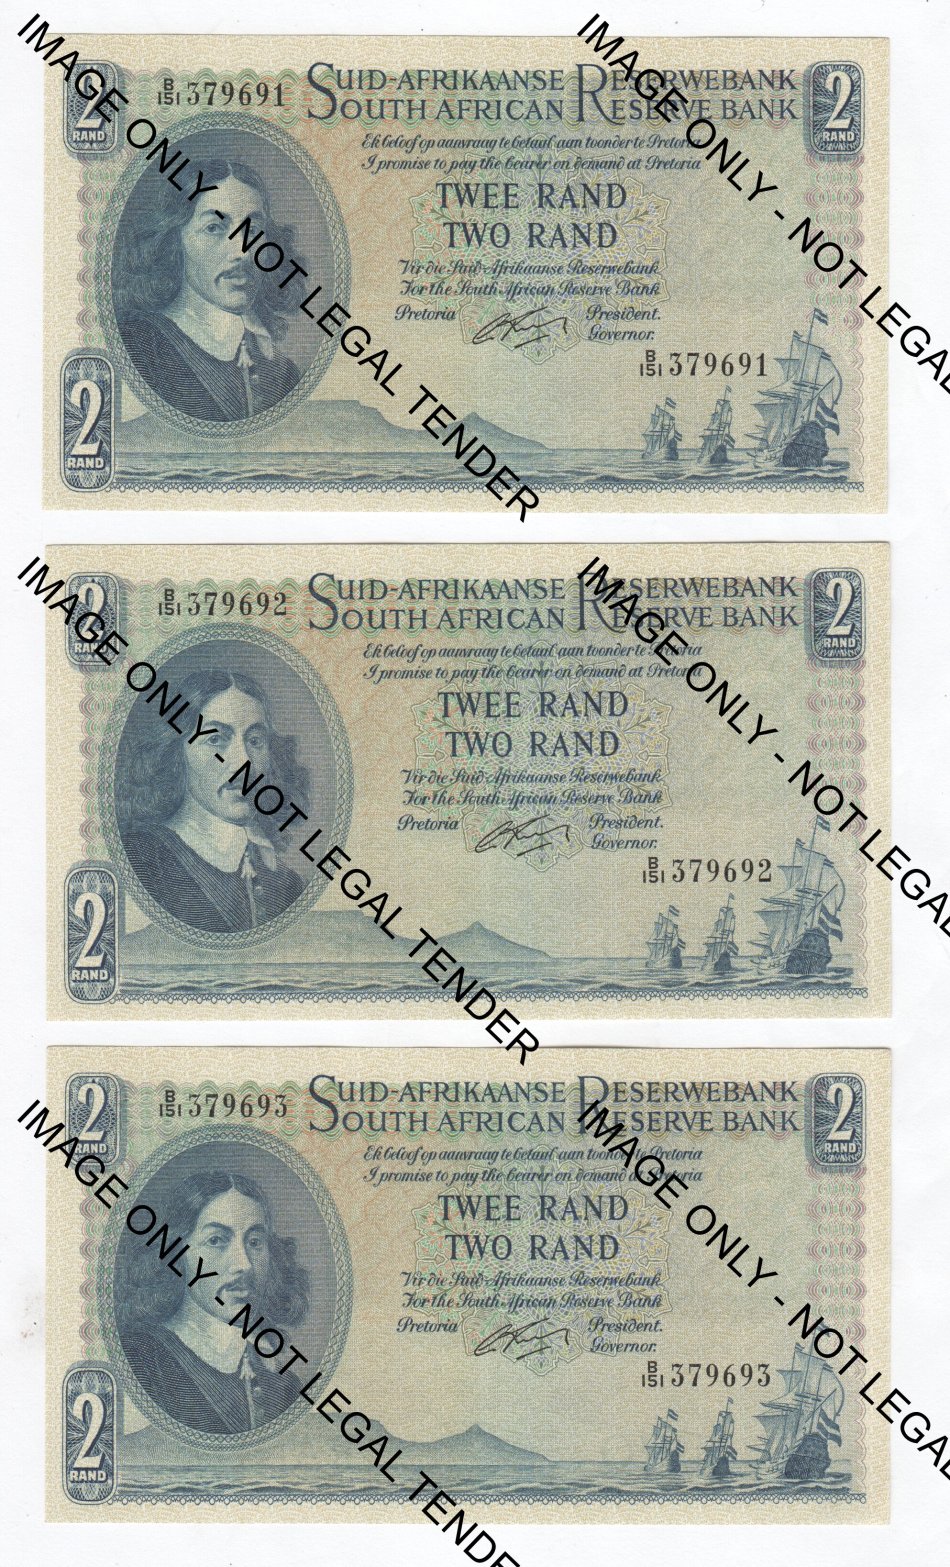 Lot of 10 Rissik R2 notes 1962 with consecutive numbers - One note with gum residue